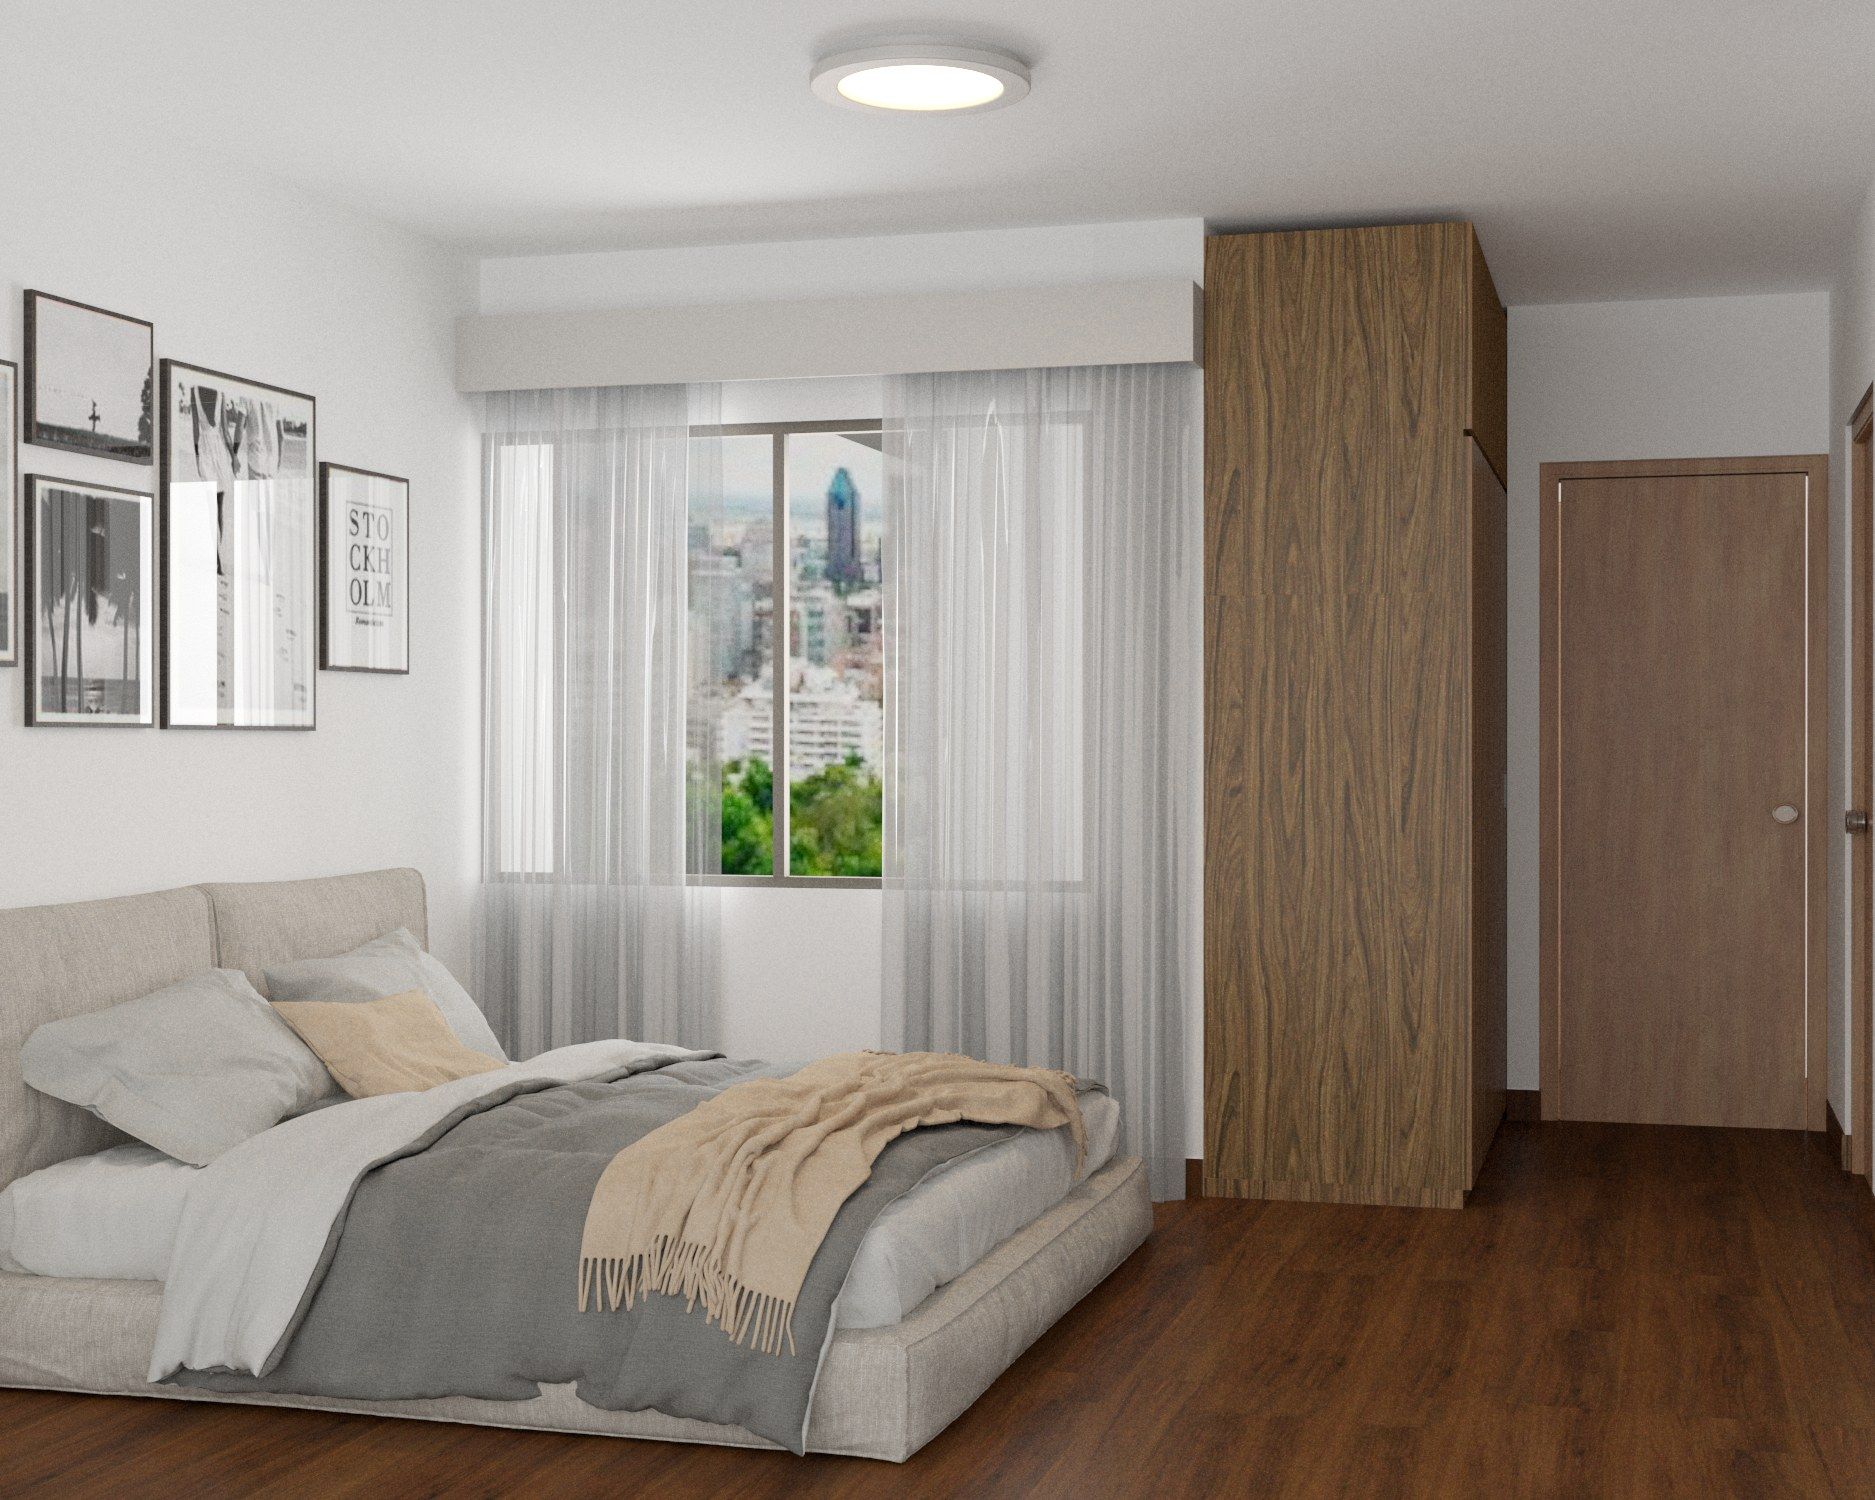 Contemporary Bedroom Design With A Beige Upholstered Bed